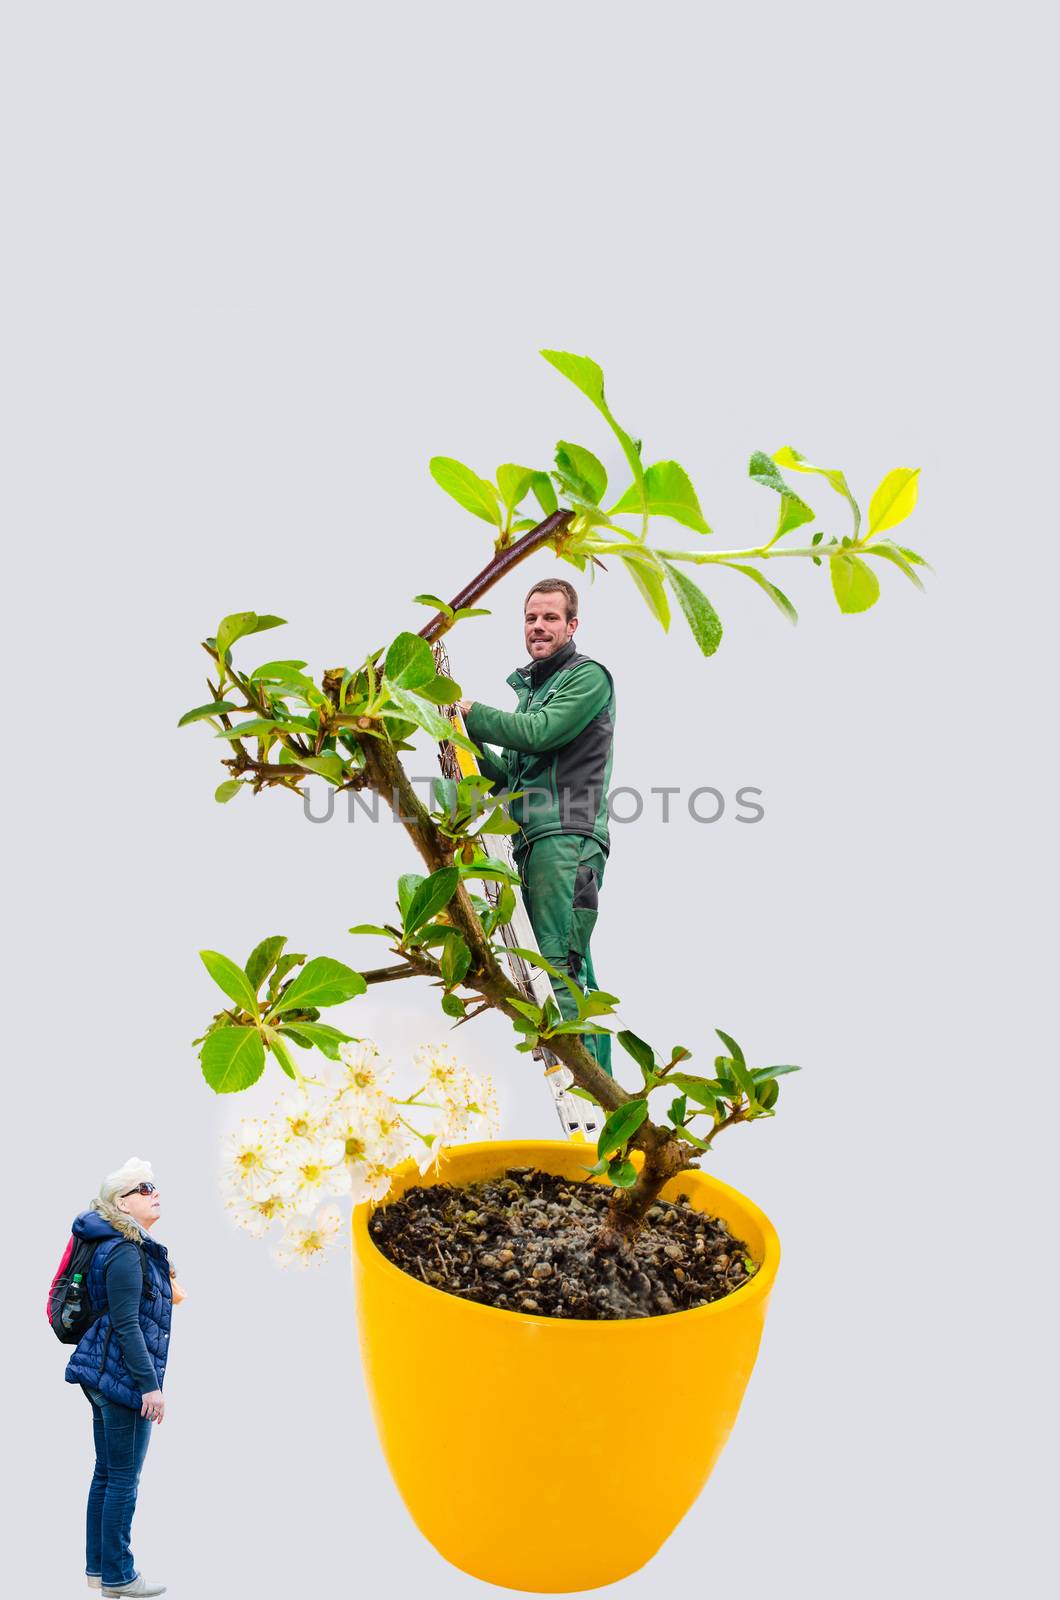 Abstract, woman and man with bonsai tree by JFsPic